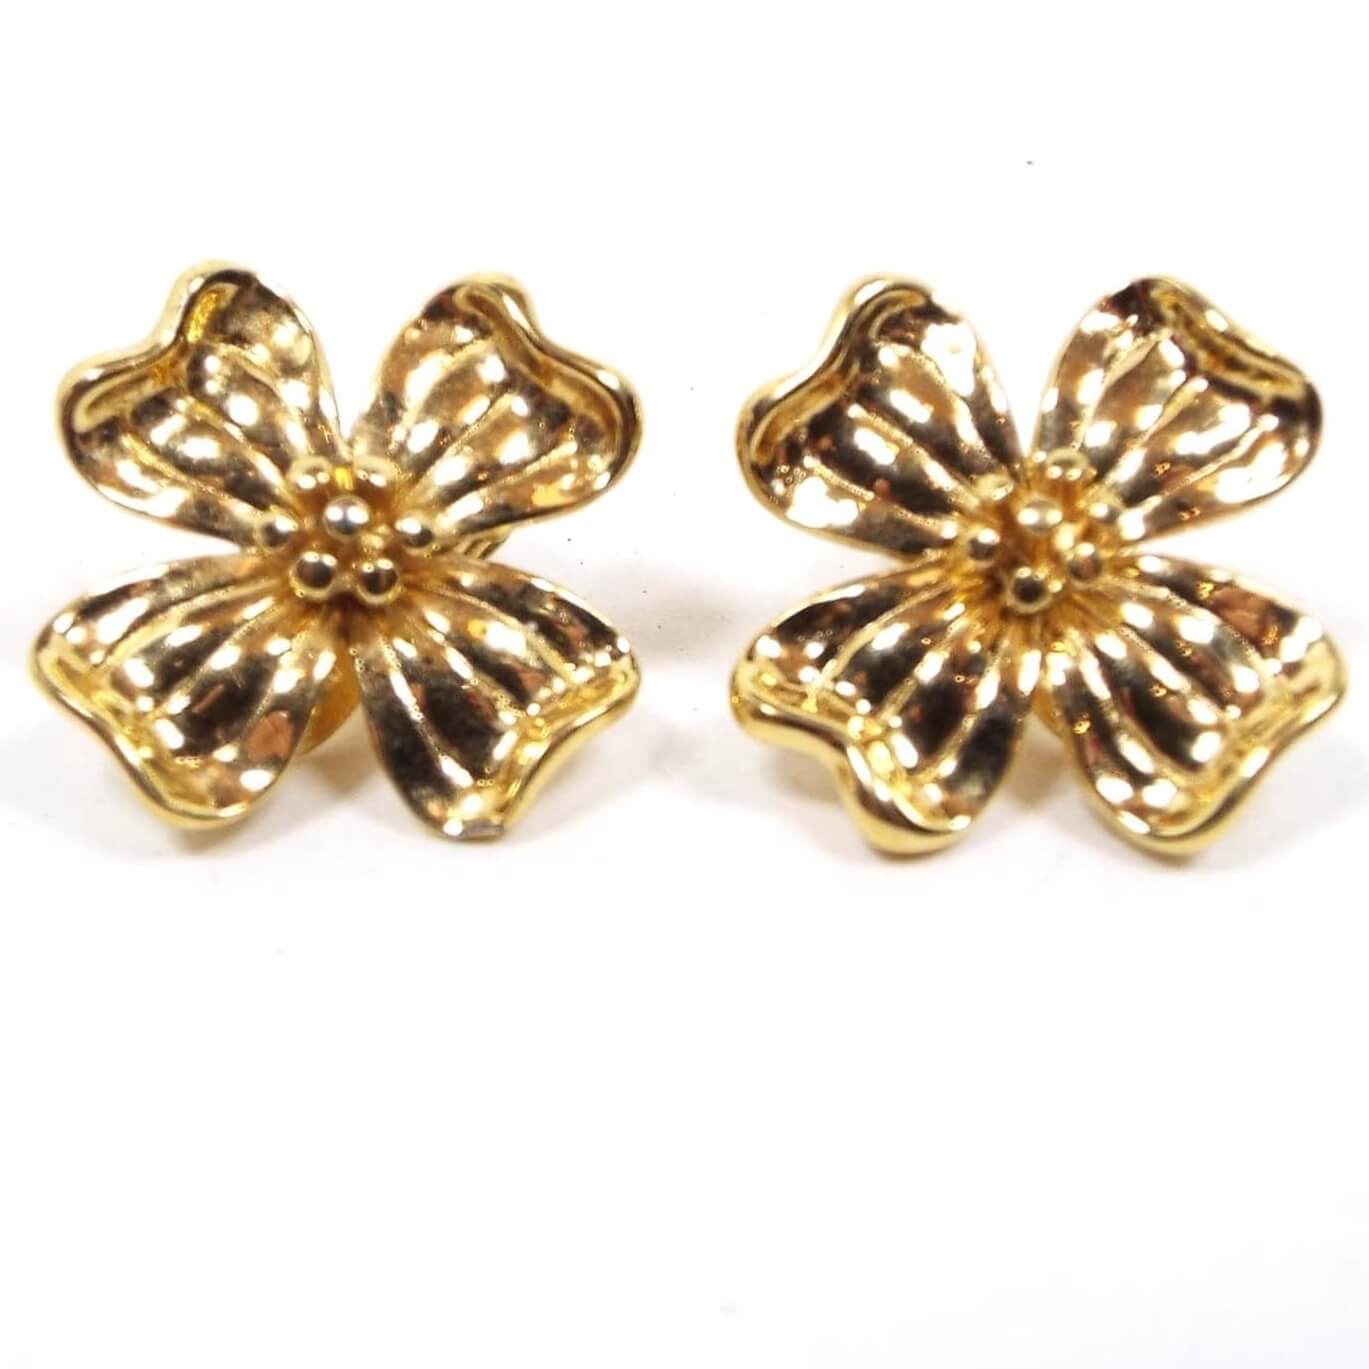 Front view of the retro vintage dogwood flower clip on earrings by Monet. They are gold tone in color and flower shaped.